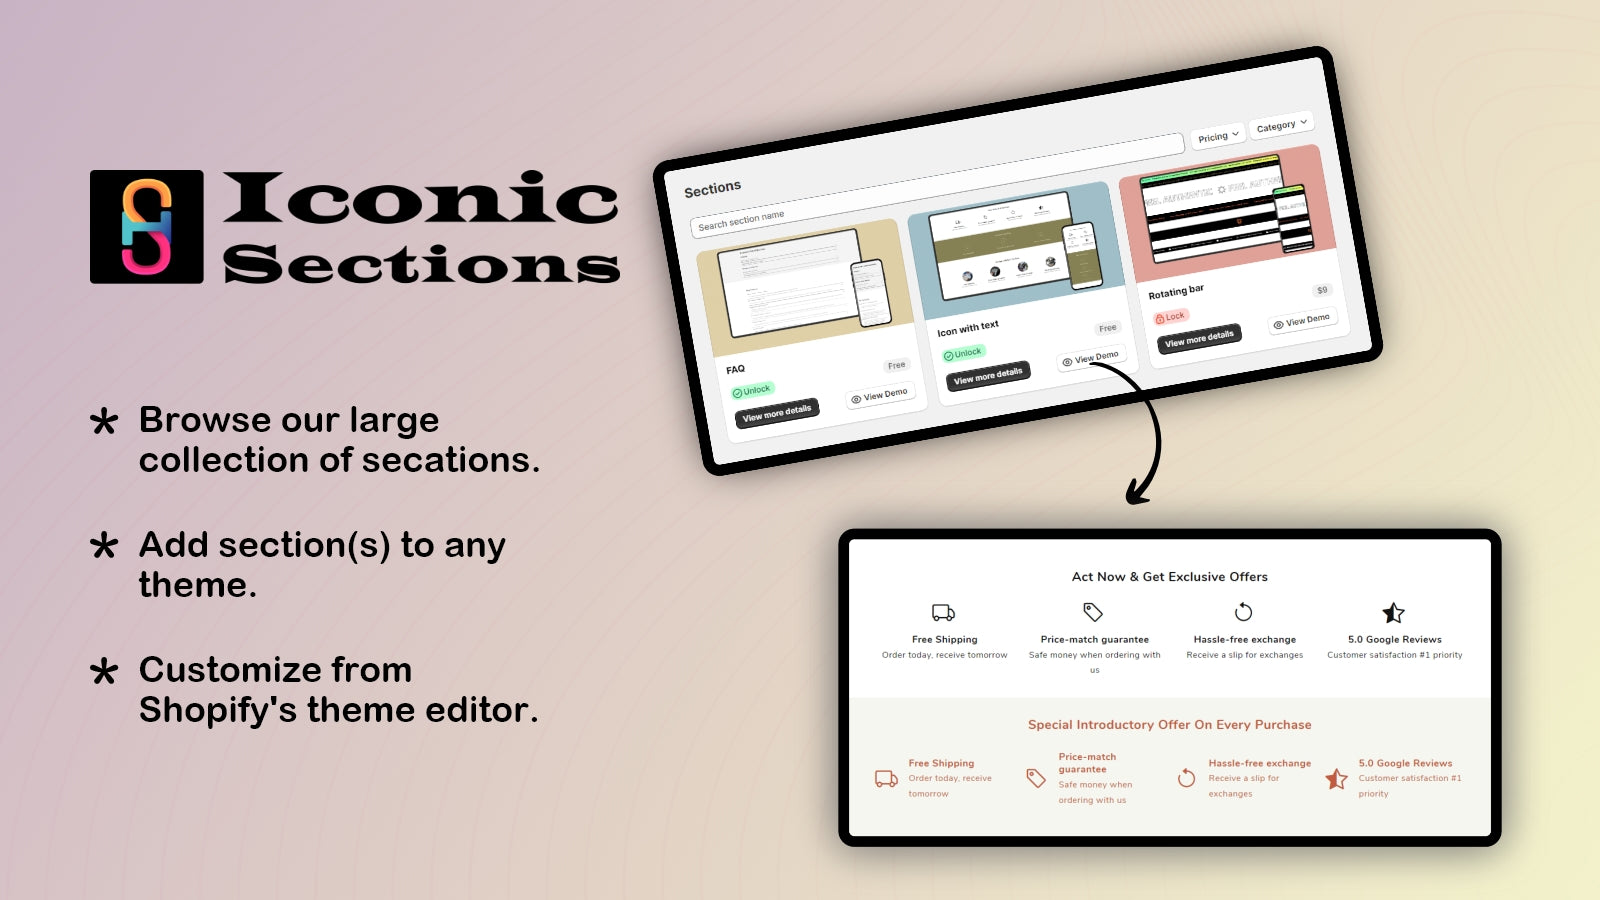 Iconic Sections: Theme Section Screenshot